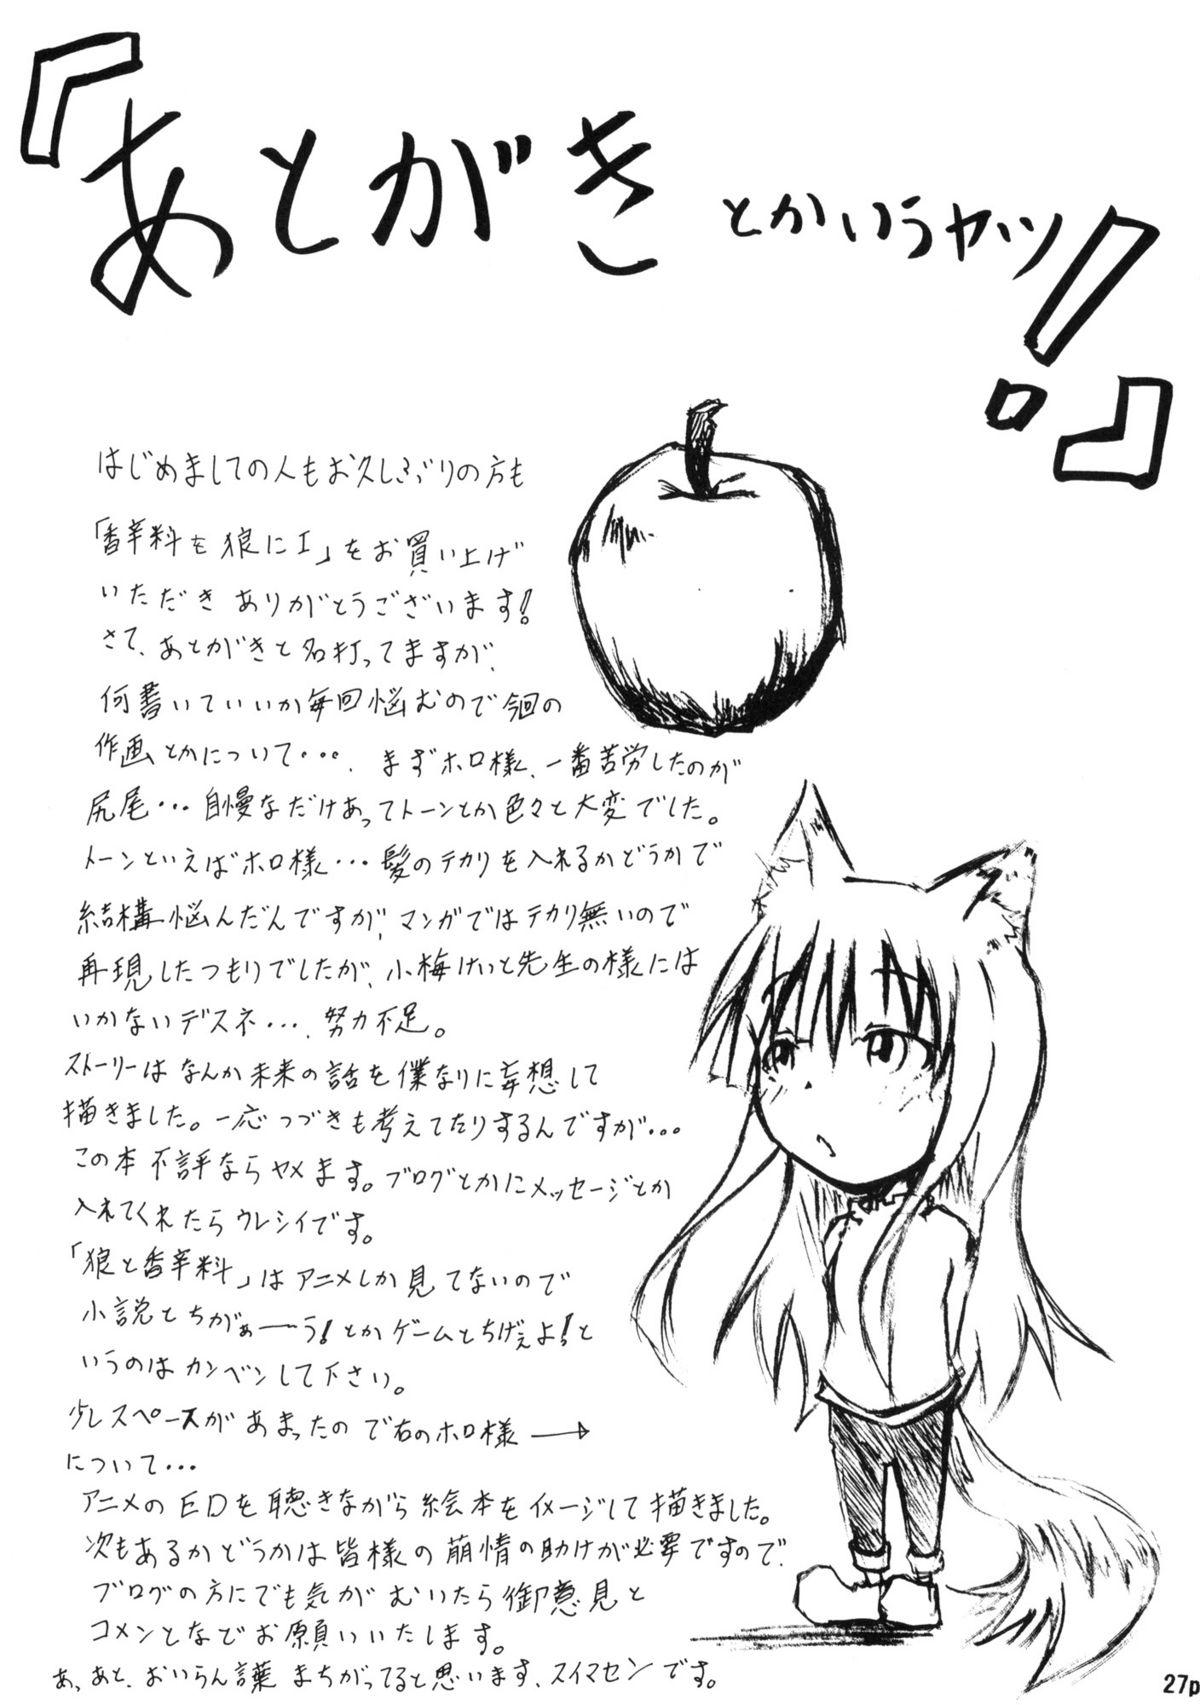 Tranny Kousinryou wo Ookami ni Ⅰ - Spice and wolf Shemales - Page 28